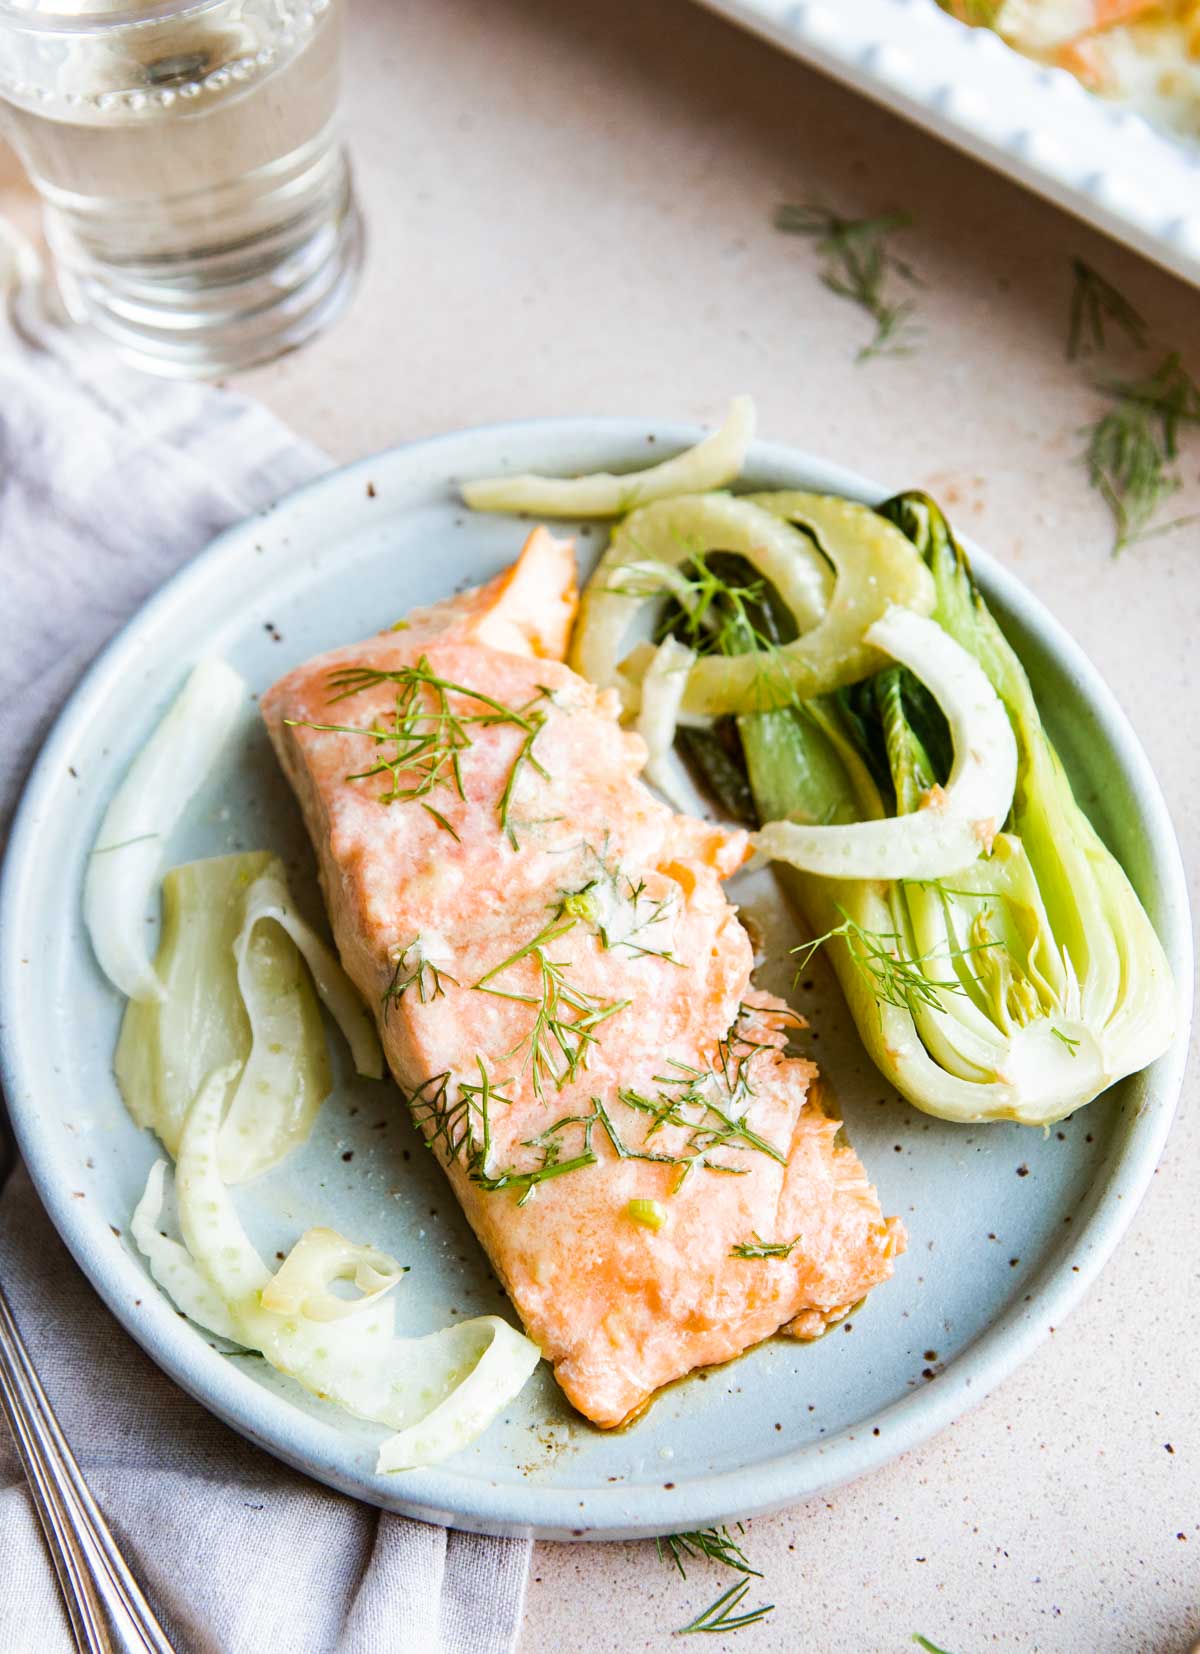 small piece of salmon on a plate with baby bok choy and fennel 